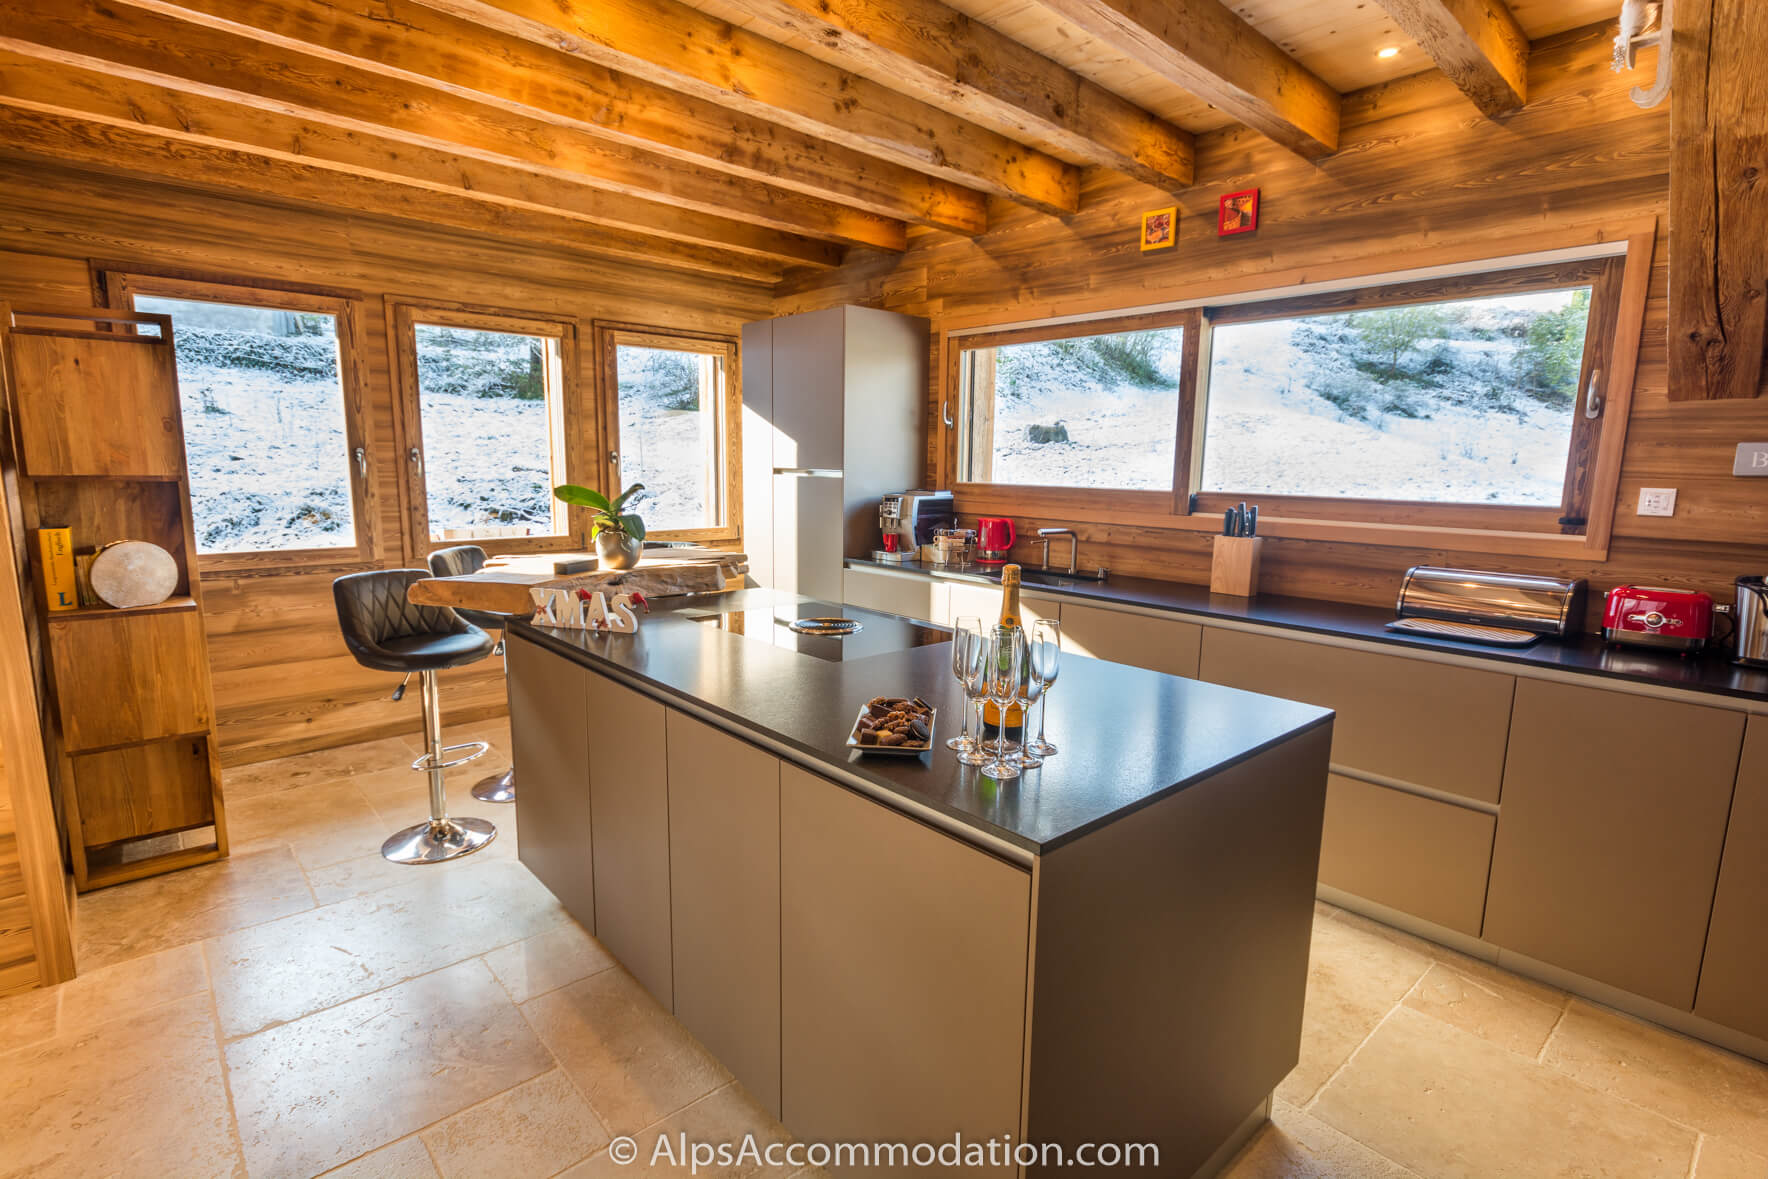 Chalet Sole Mio Morillon - A spacious and fully equipped kitchen